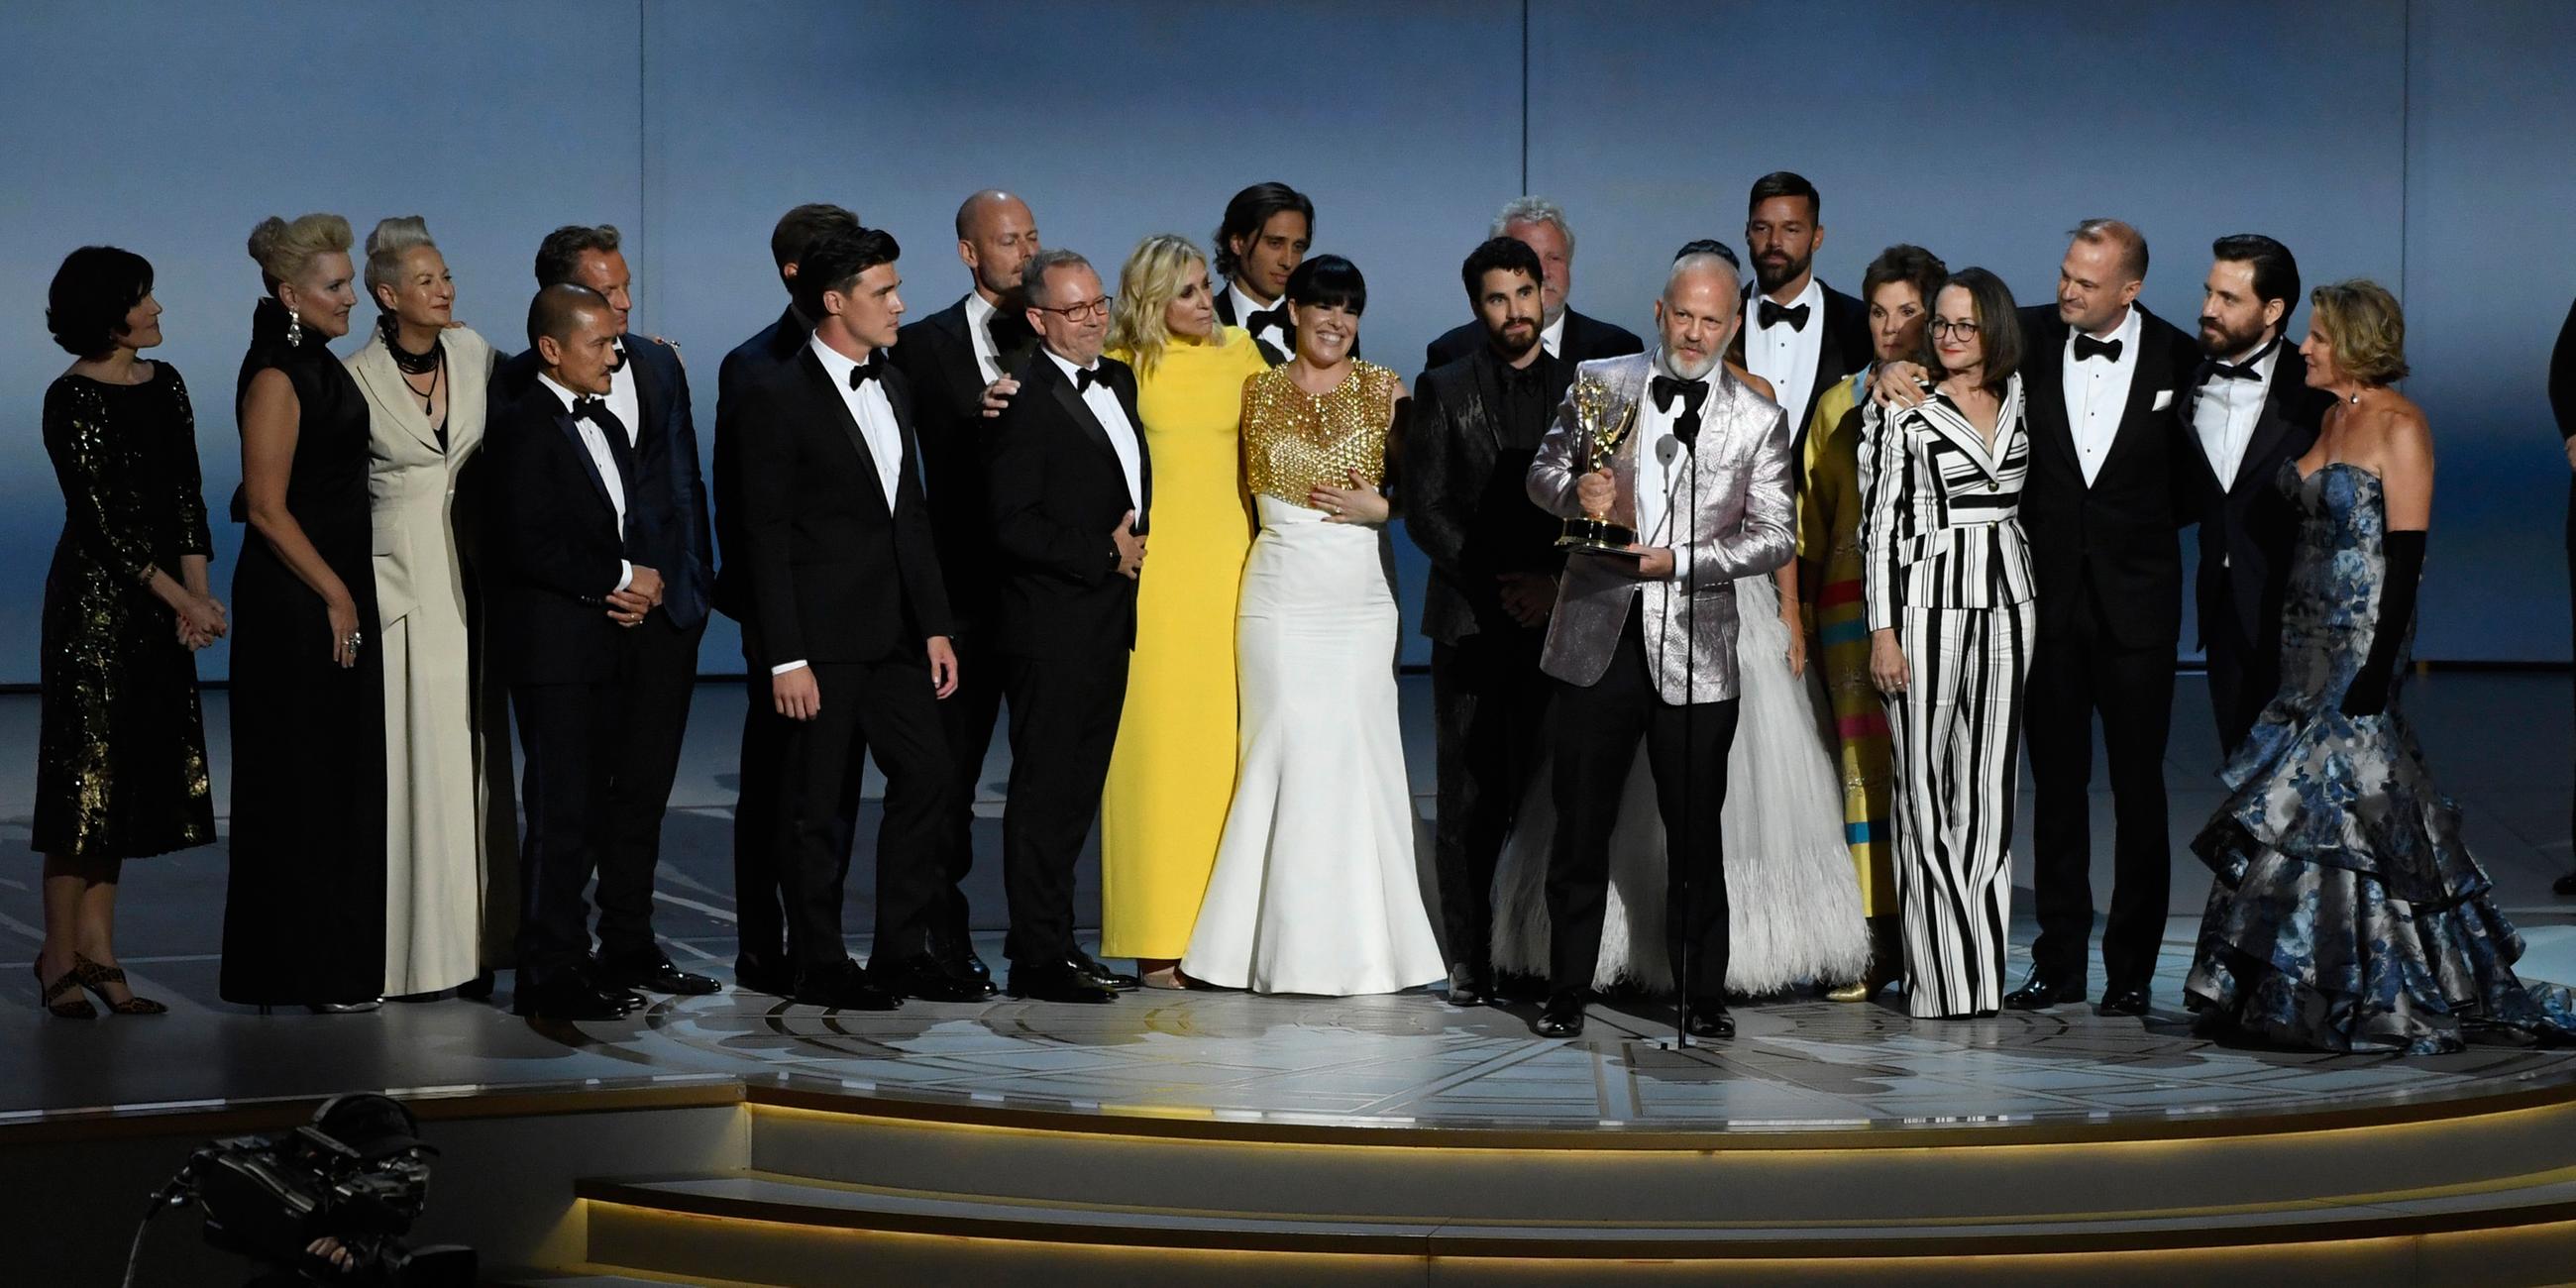 Emmy Awards: Beste Miniserie - "The Assassination of Gianni Versace: American Crime Story"